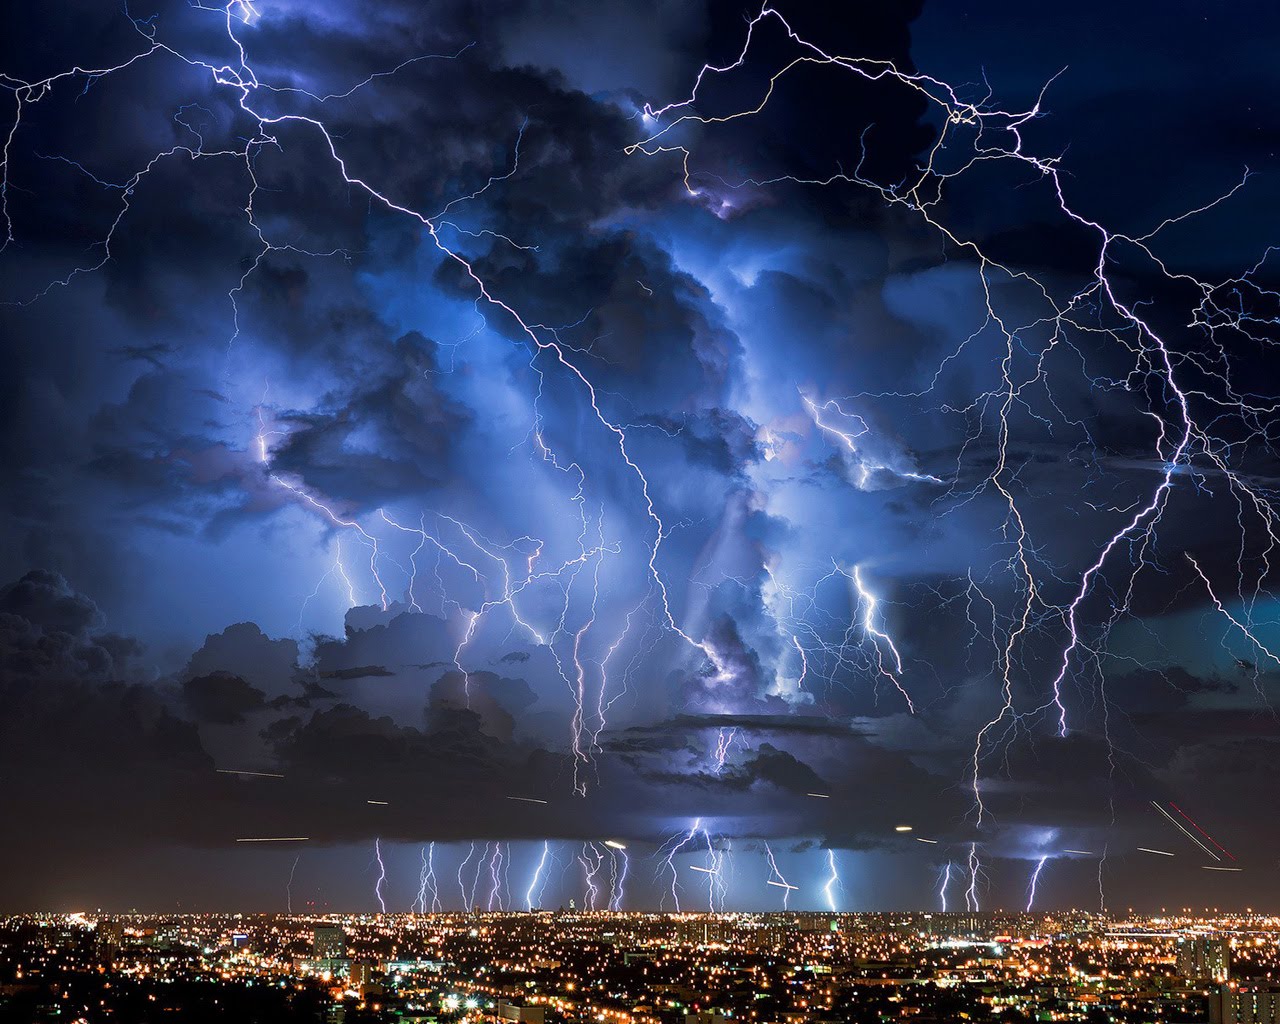 True or myth? Xiaomi tested whether a thunderstorm affects the operation of a smartphone